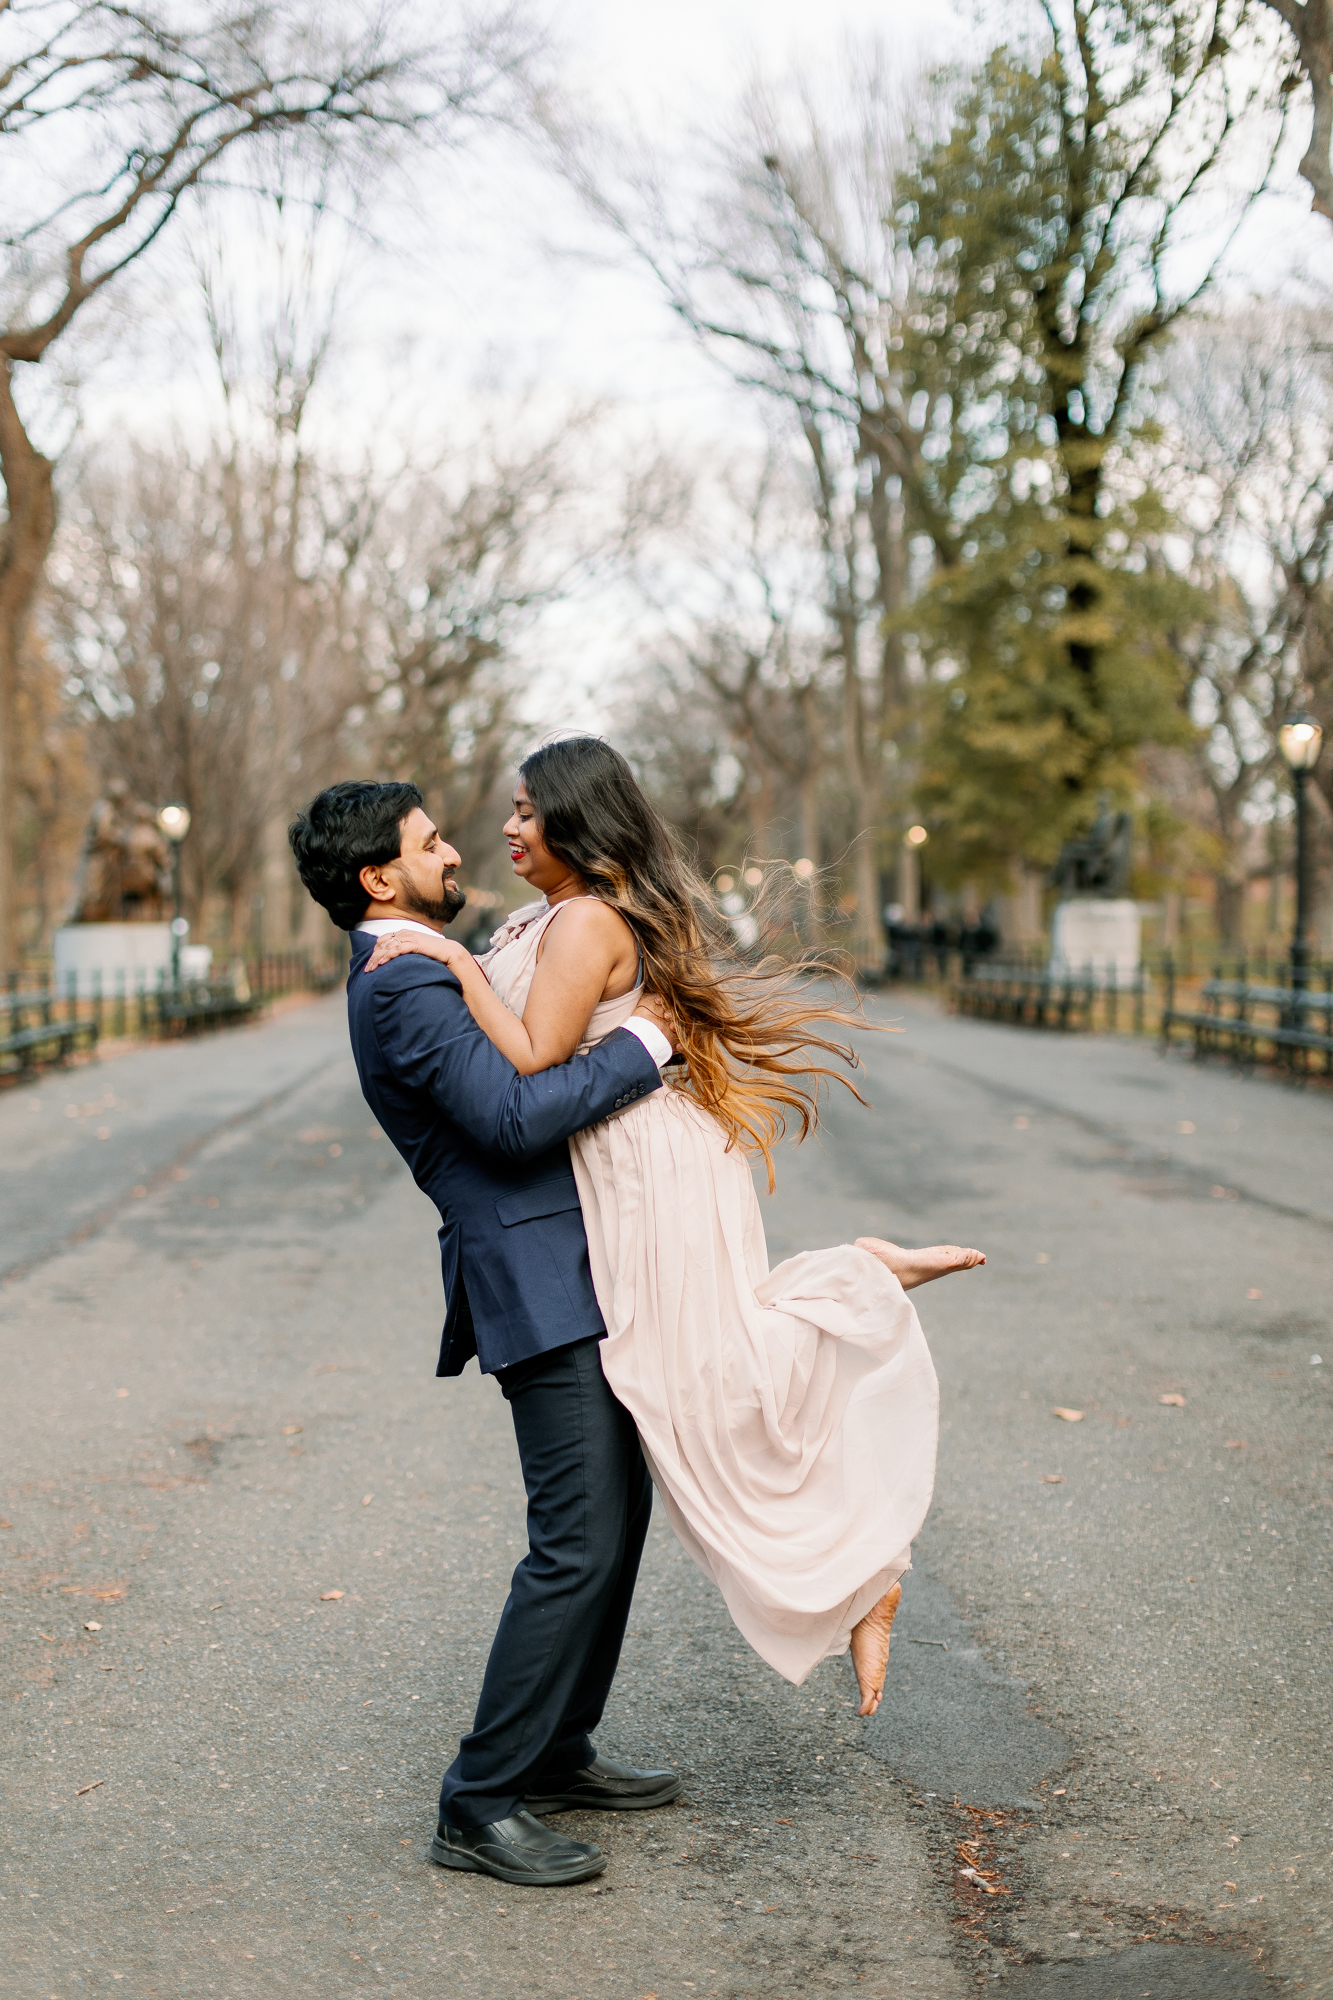 Authentic Pose Ideas for your Engagement Session